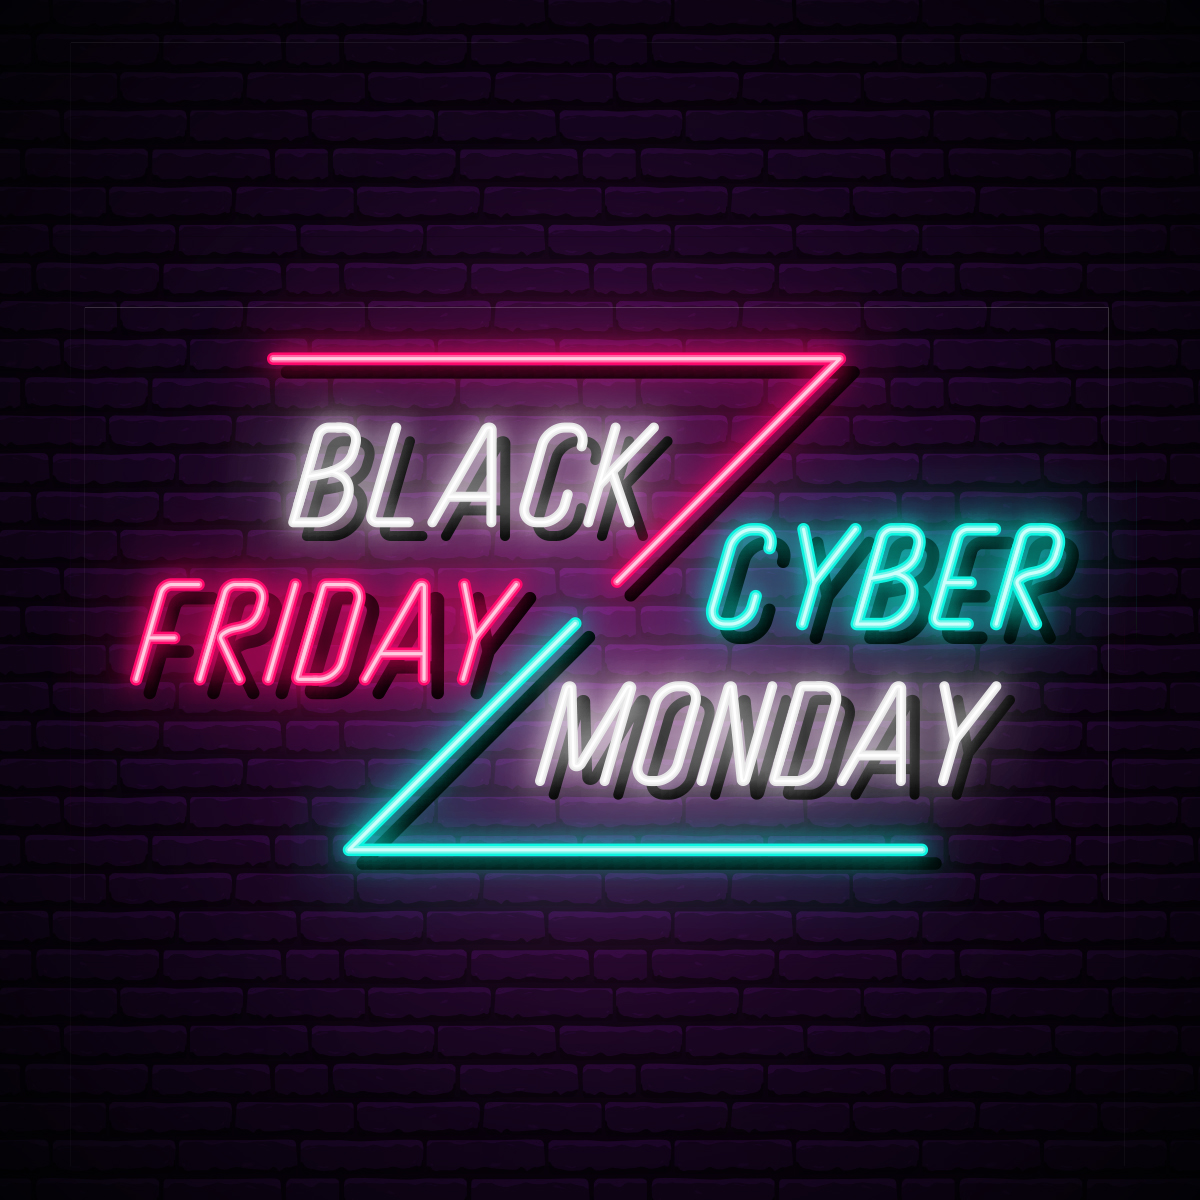 Great CX - Your best Black Friday and Cyber Monday offer